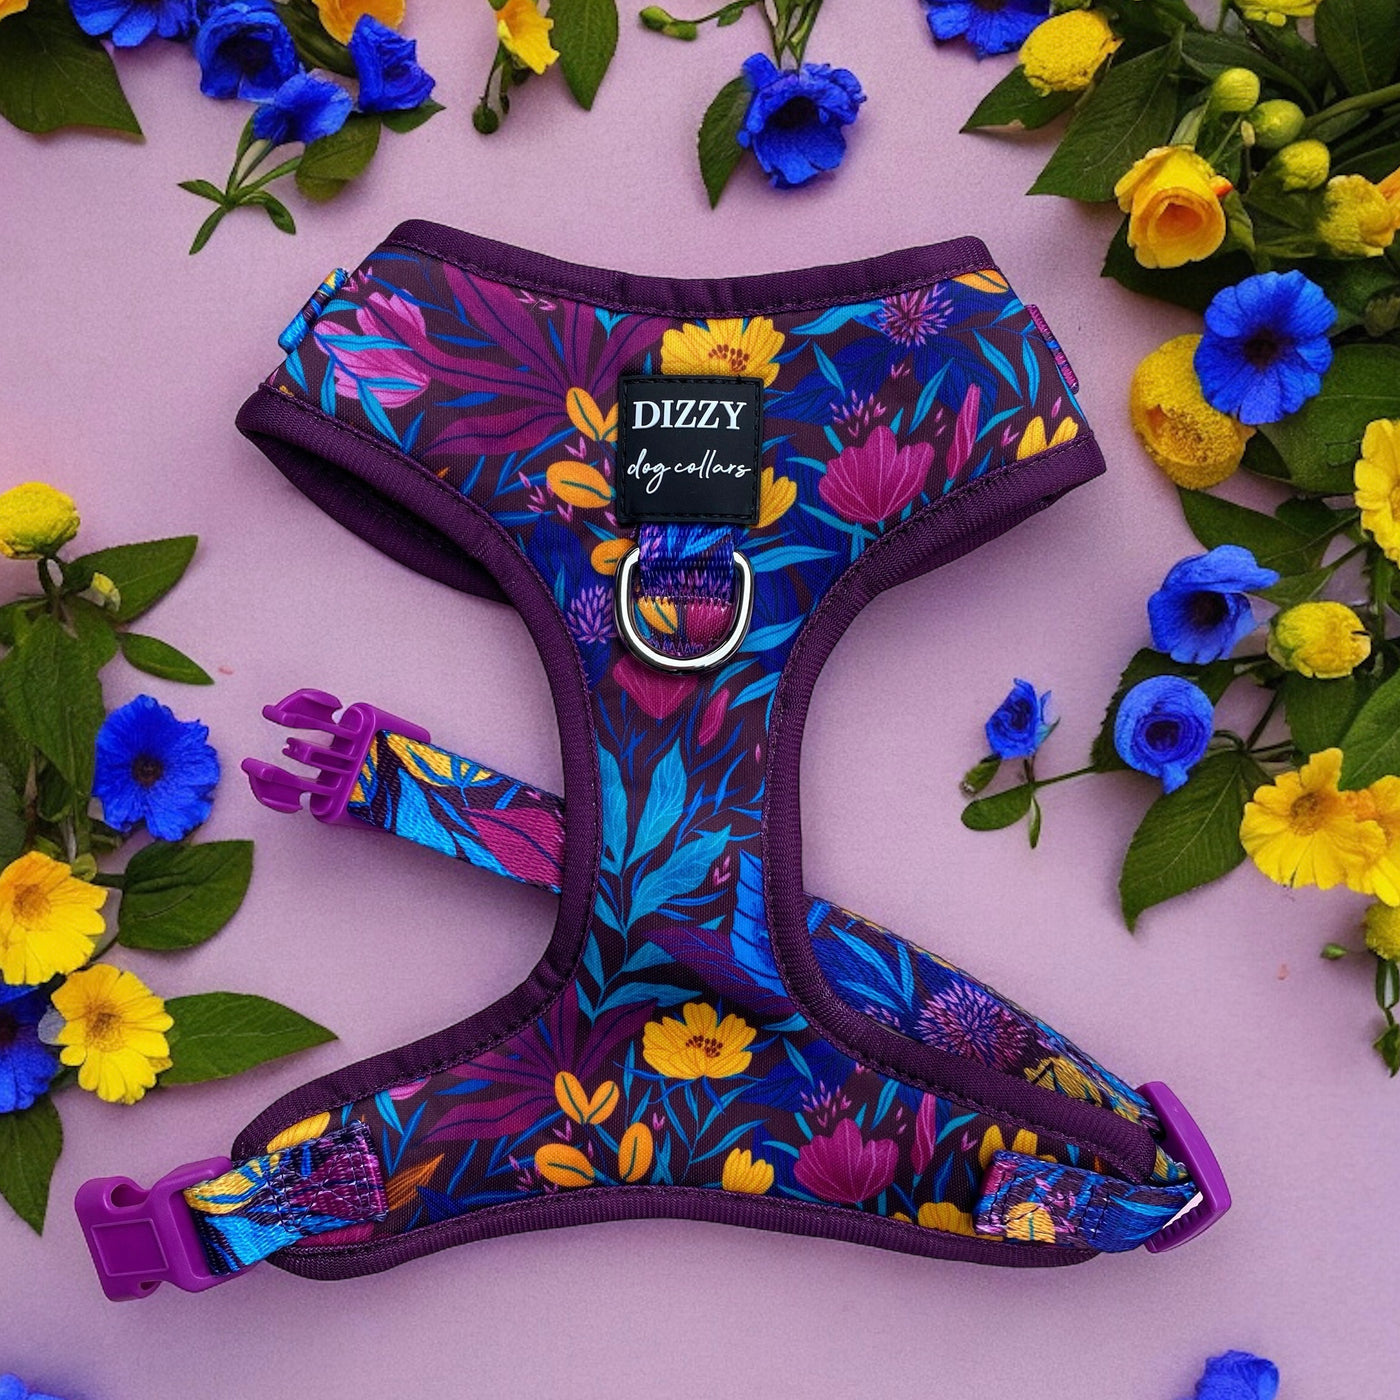 A vibrant dog harness from Dizzy Dog Collars is displayed on a pink background, surrounded by yellow and blue flowers. The harness features a colourful floral pattern with shades of purple, blue, yellow, and pink. It has purple clasps and a metal D-ring for attaching a leash. The design is lively and eye-catching, perfect for adding a touch of style to a dog's outfit.